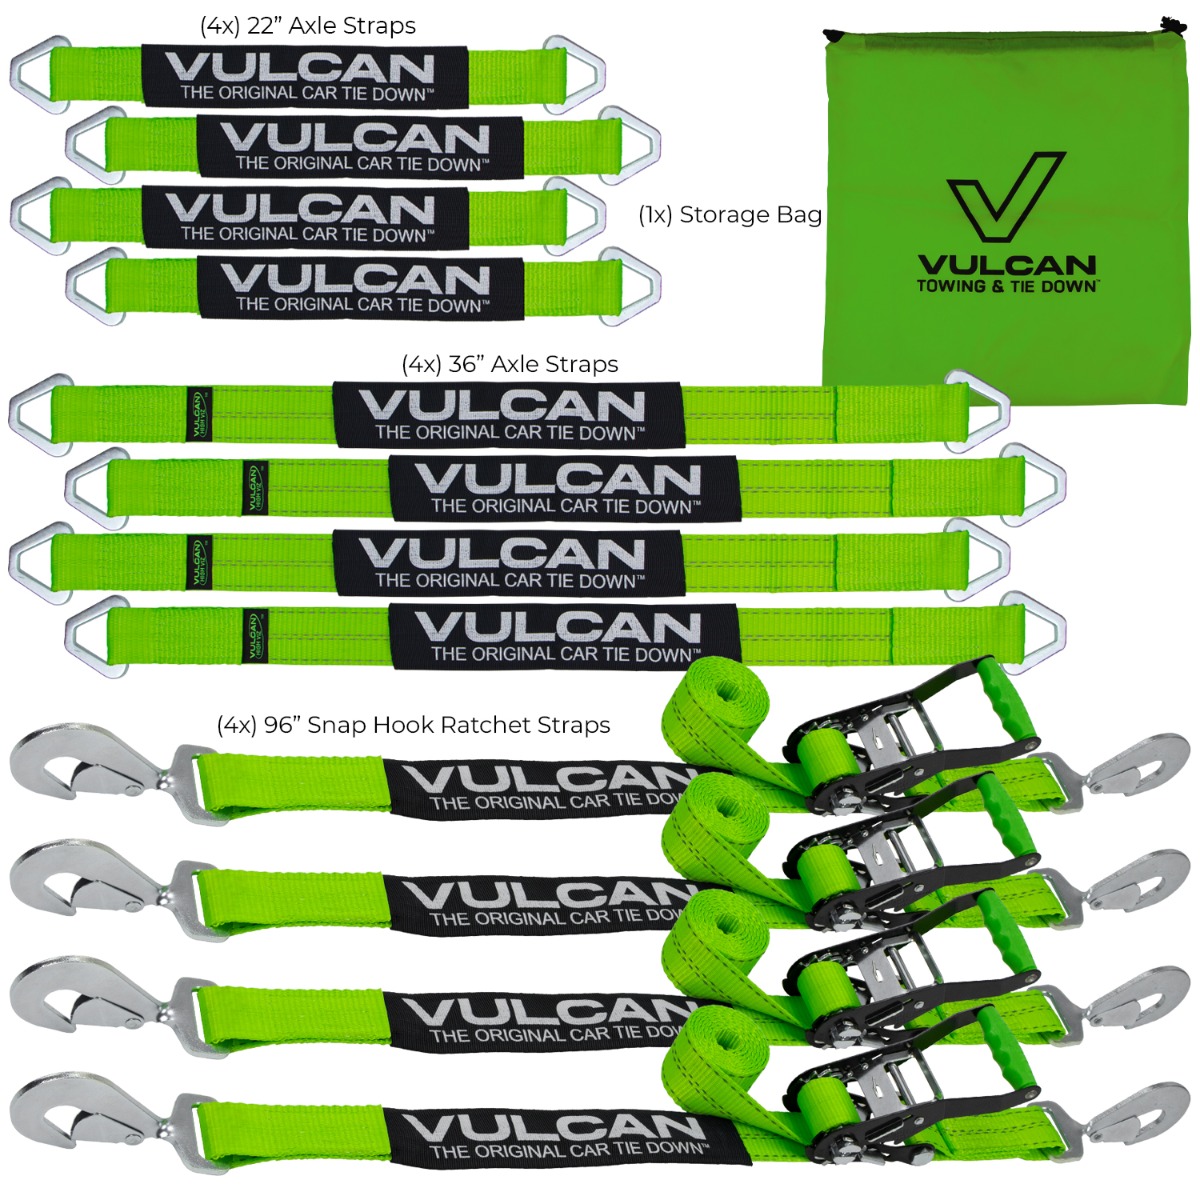 VULCAN Complete Axle Strap Tie Down Kit with Snap Hook Ratchet Straps  High-Viz Includes (4) 22 Inch Axle Straps, (4) 36 Inch Axle Straps, and  (4) 8' Snap Hook Ratchet Straps